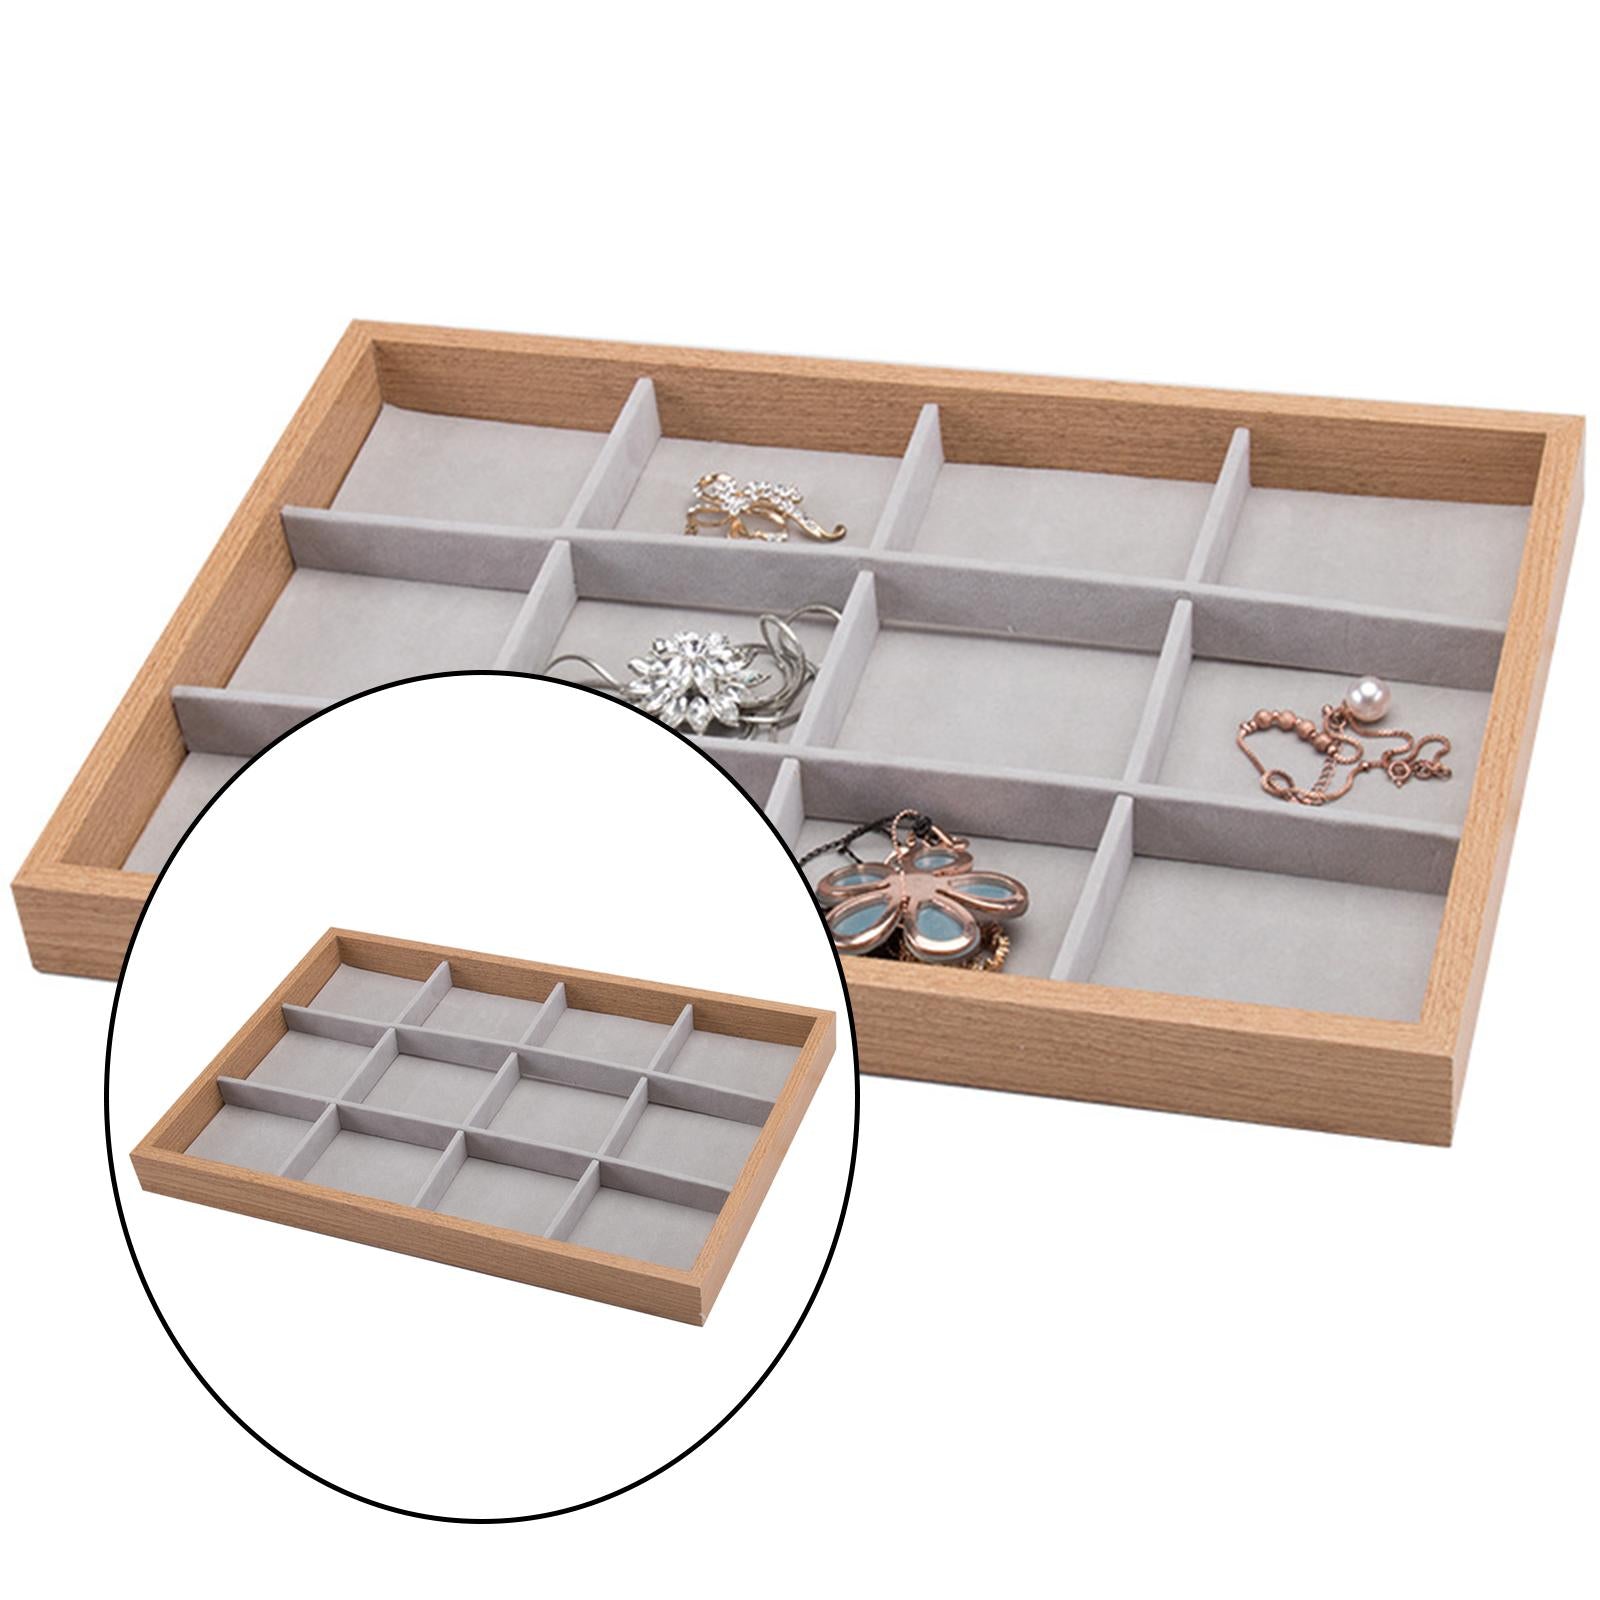 Women Ring Tray Earrings Show Case Jewelry Display Organizer Storage 12 Compartments